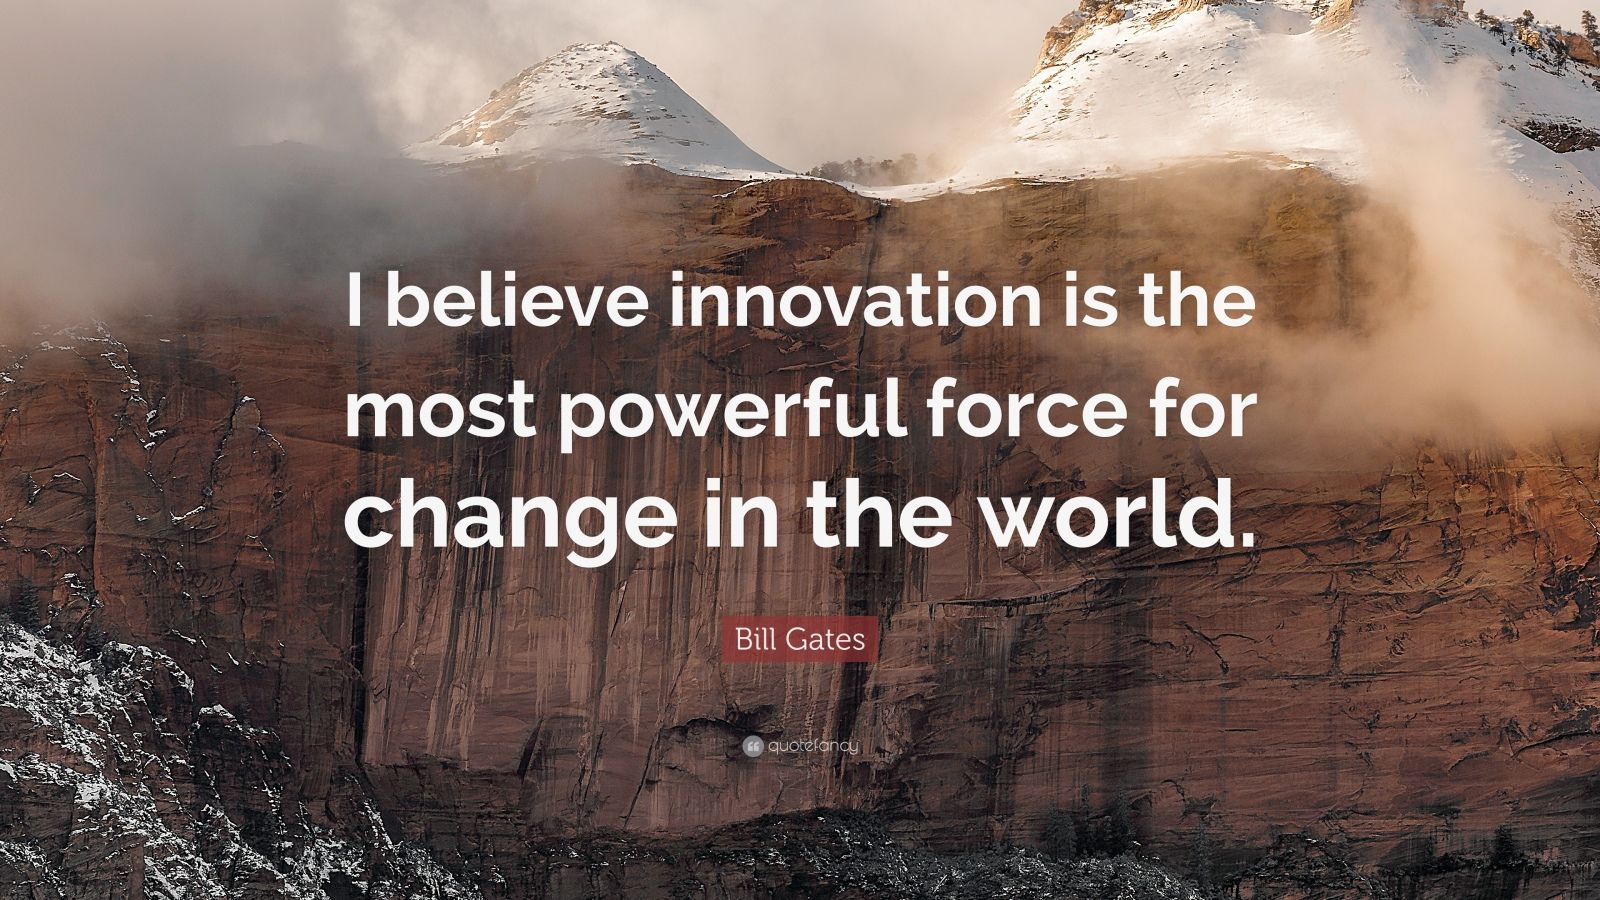 Bill Gates Quote: “I believe innovation is the most powerful force for ...